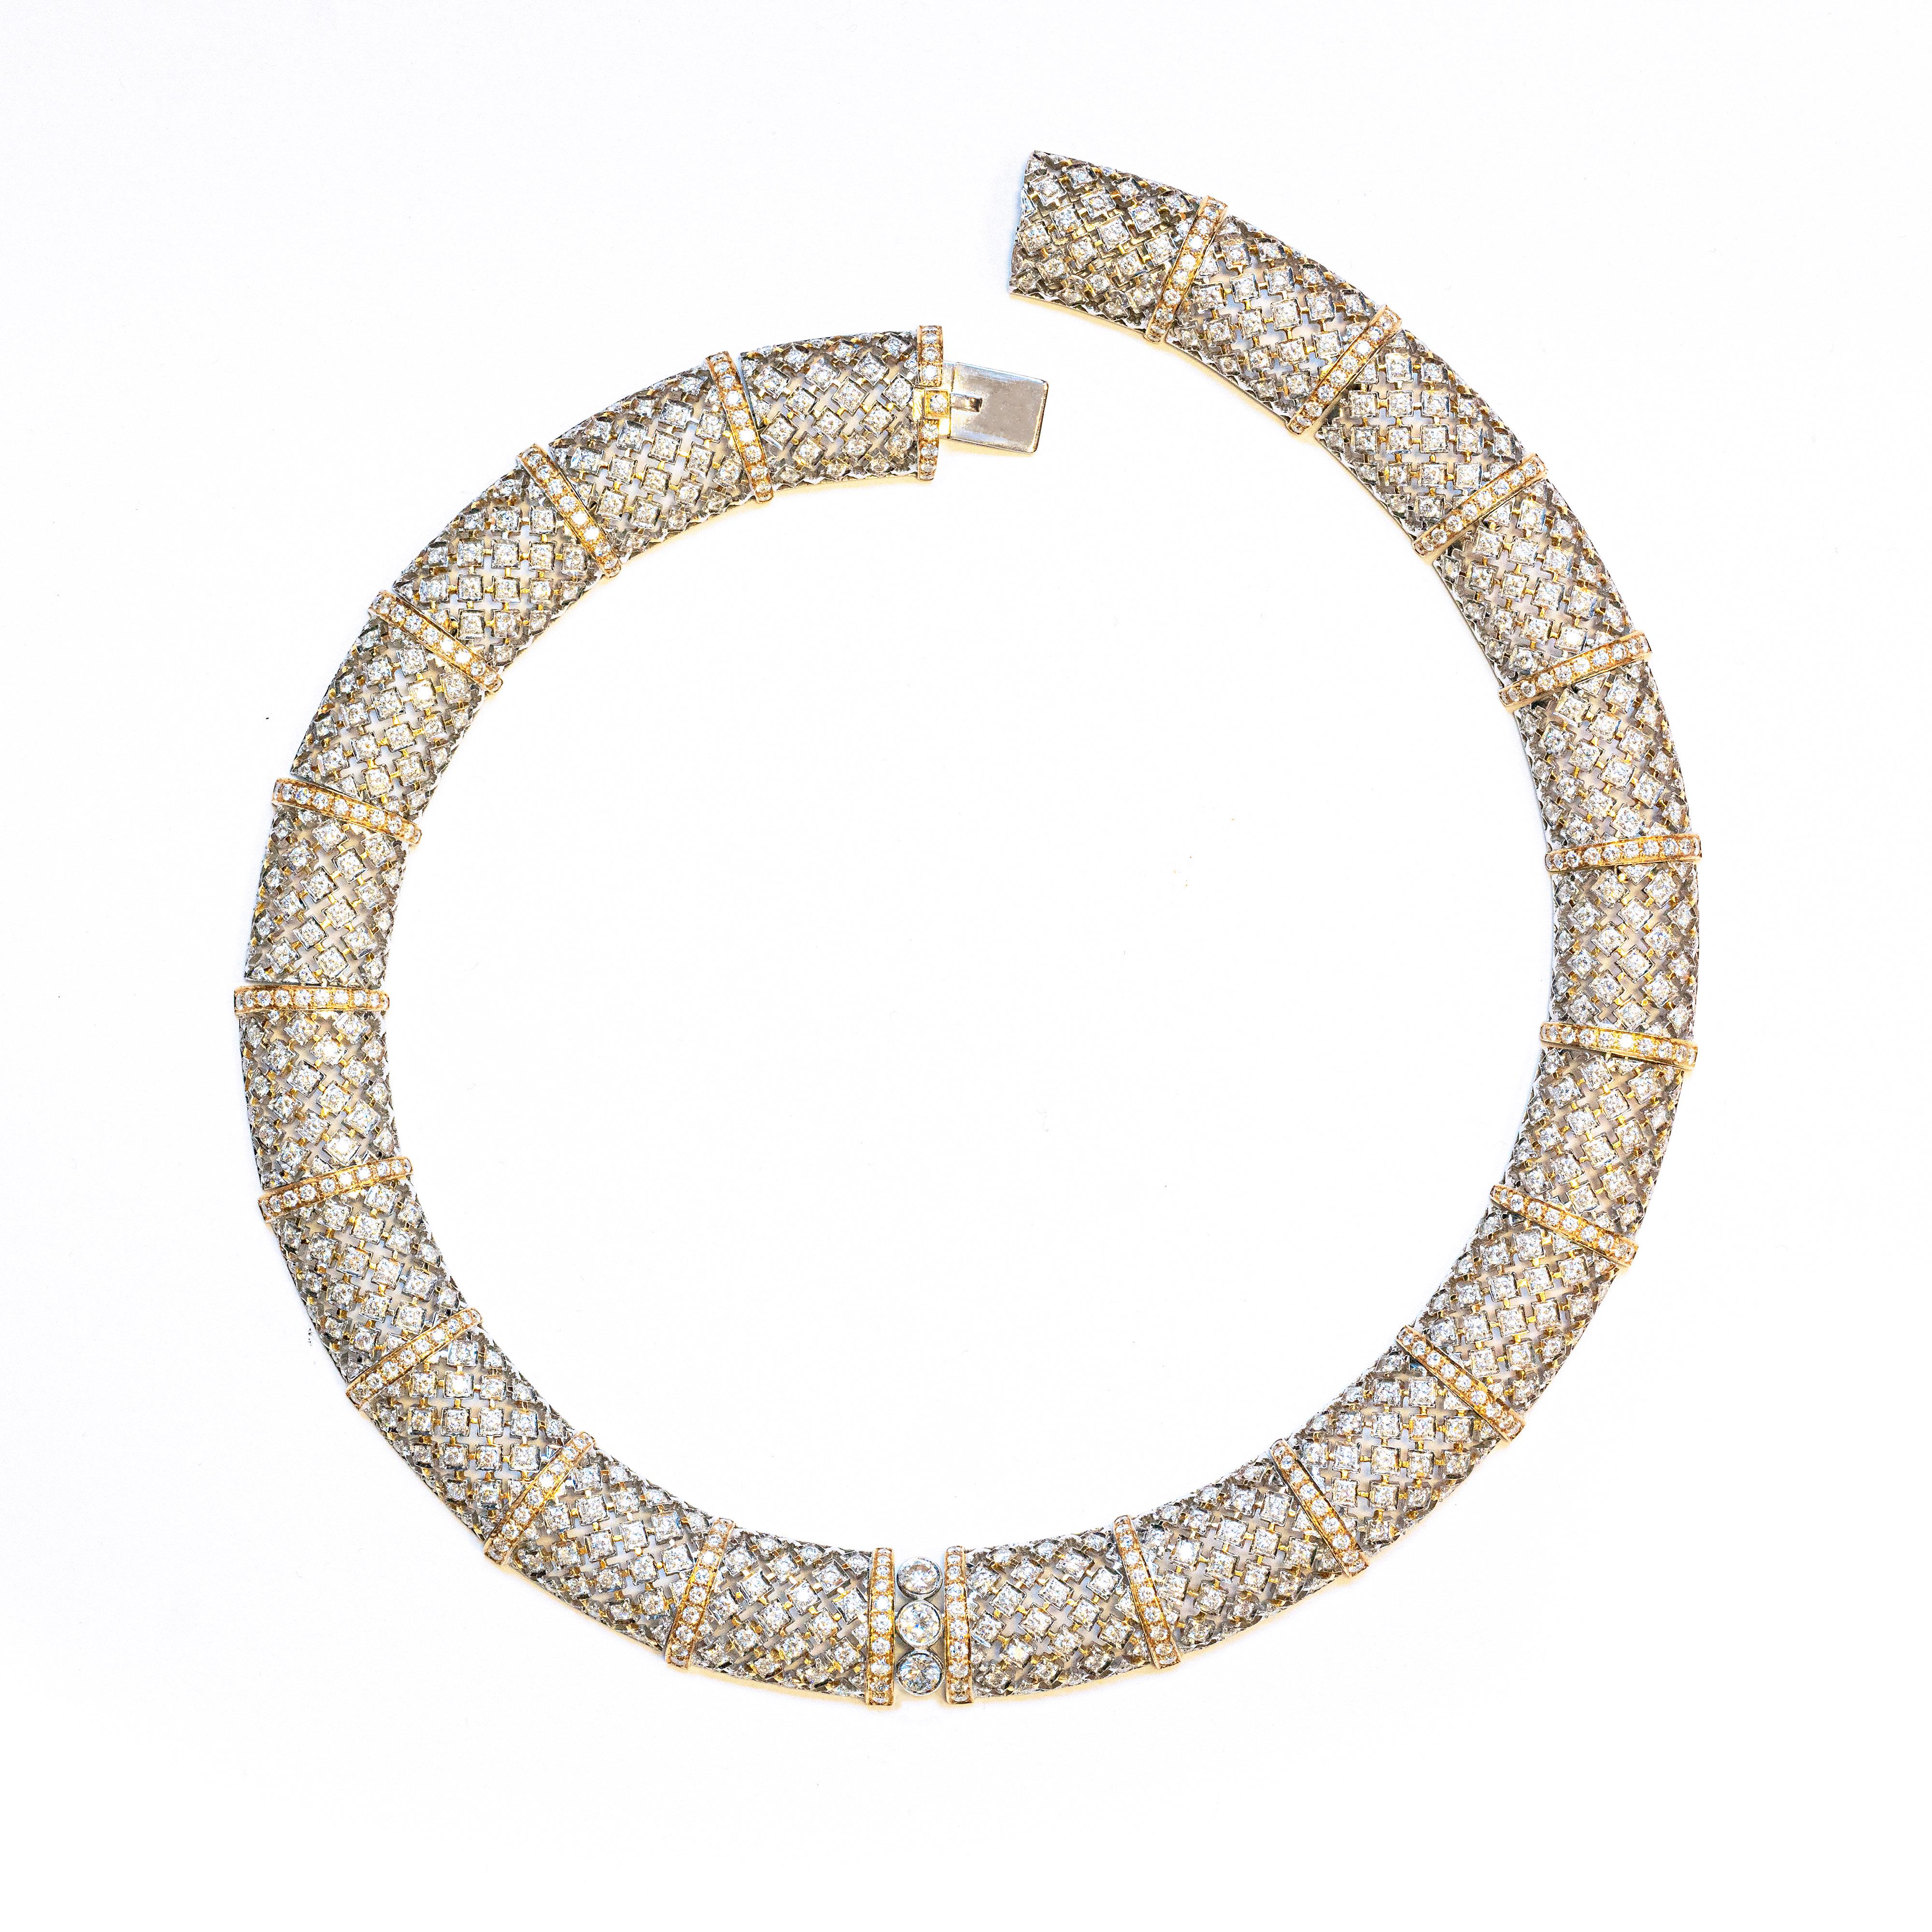 This impressive collar necklace is designed as a seamless series of 21 open work rectangular bombé links, each gracefully grain set with 25 round brilliant cut diamonds, all mounted in 18 carat white gold, open back settings. The open work links are